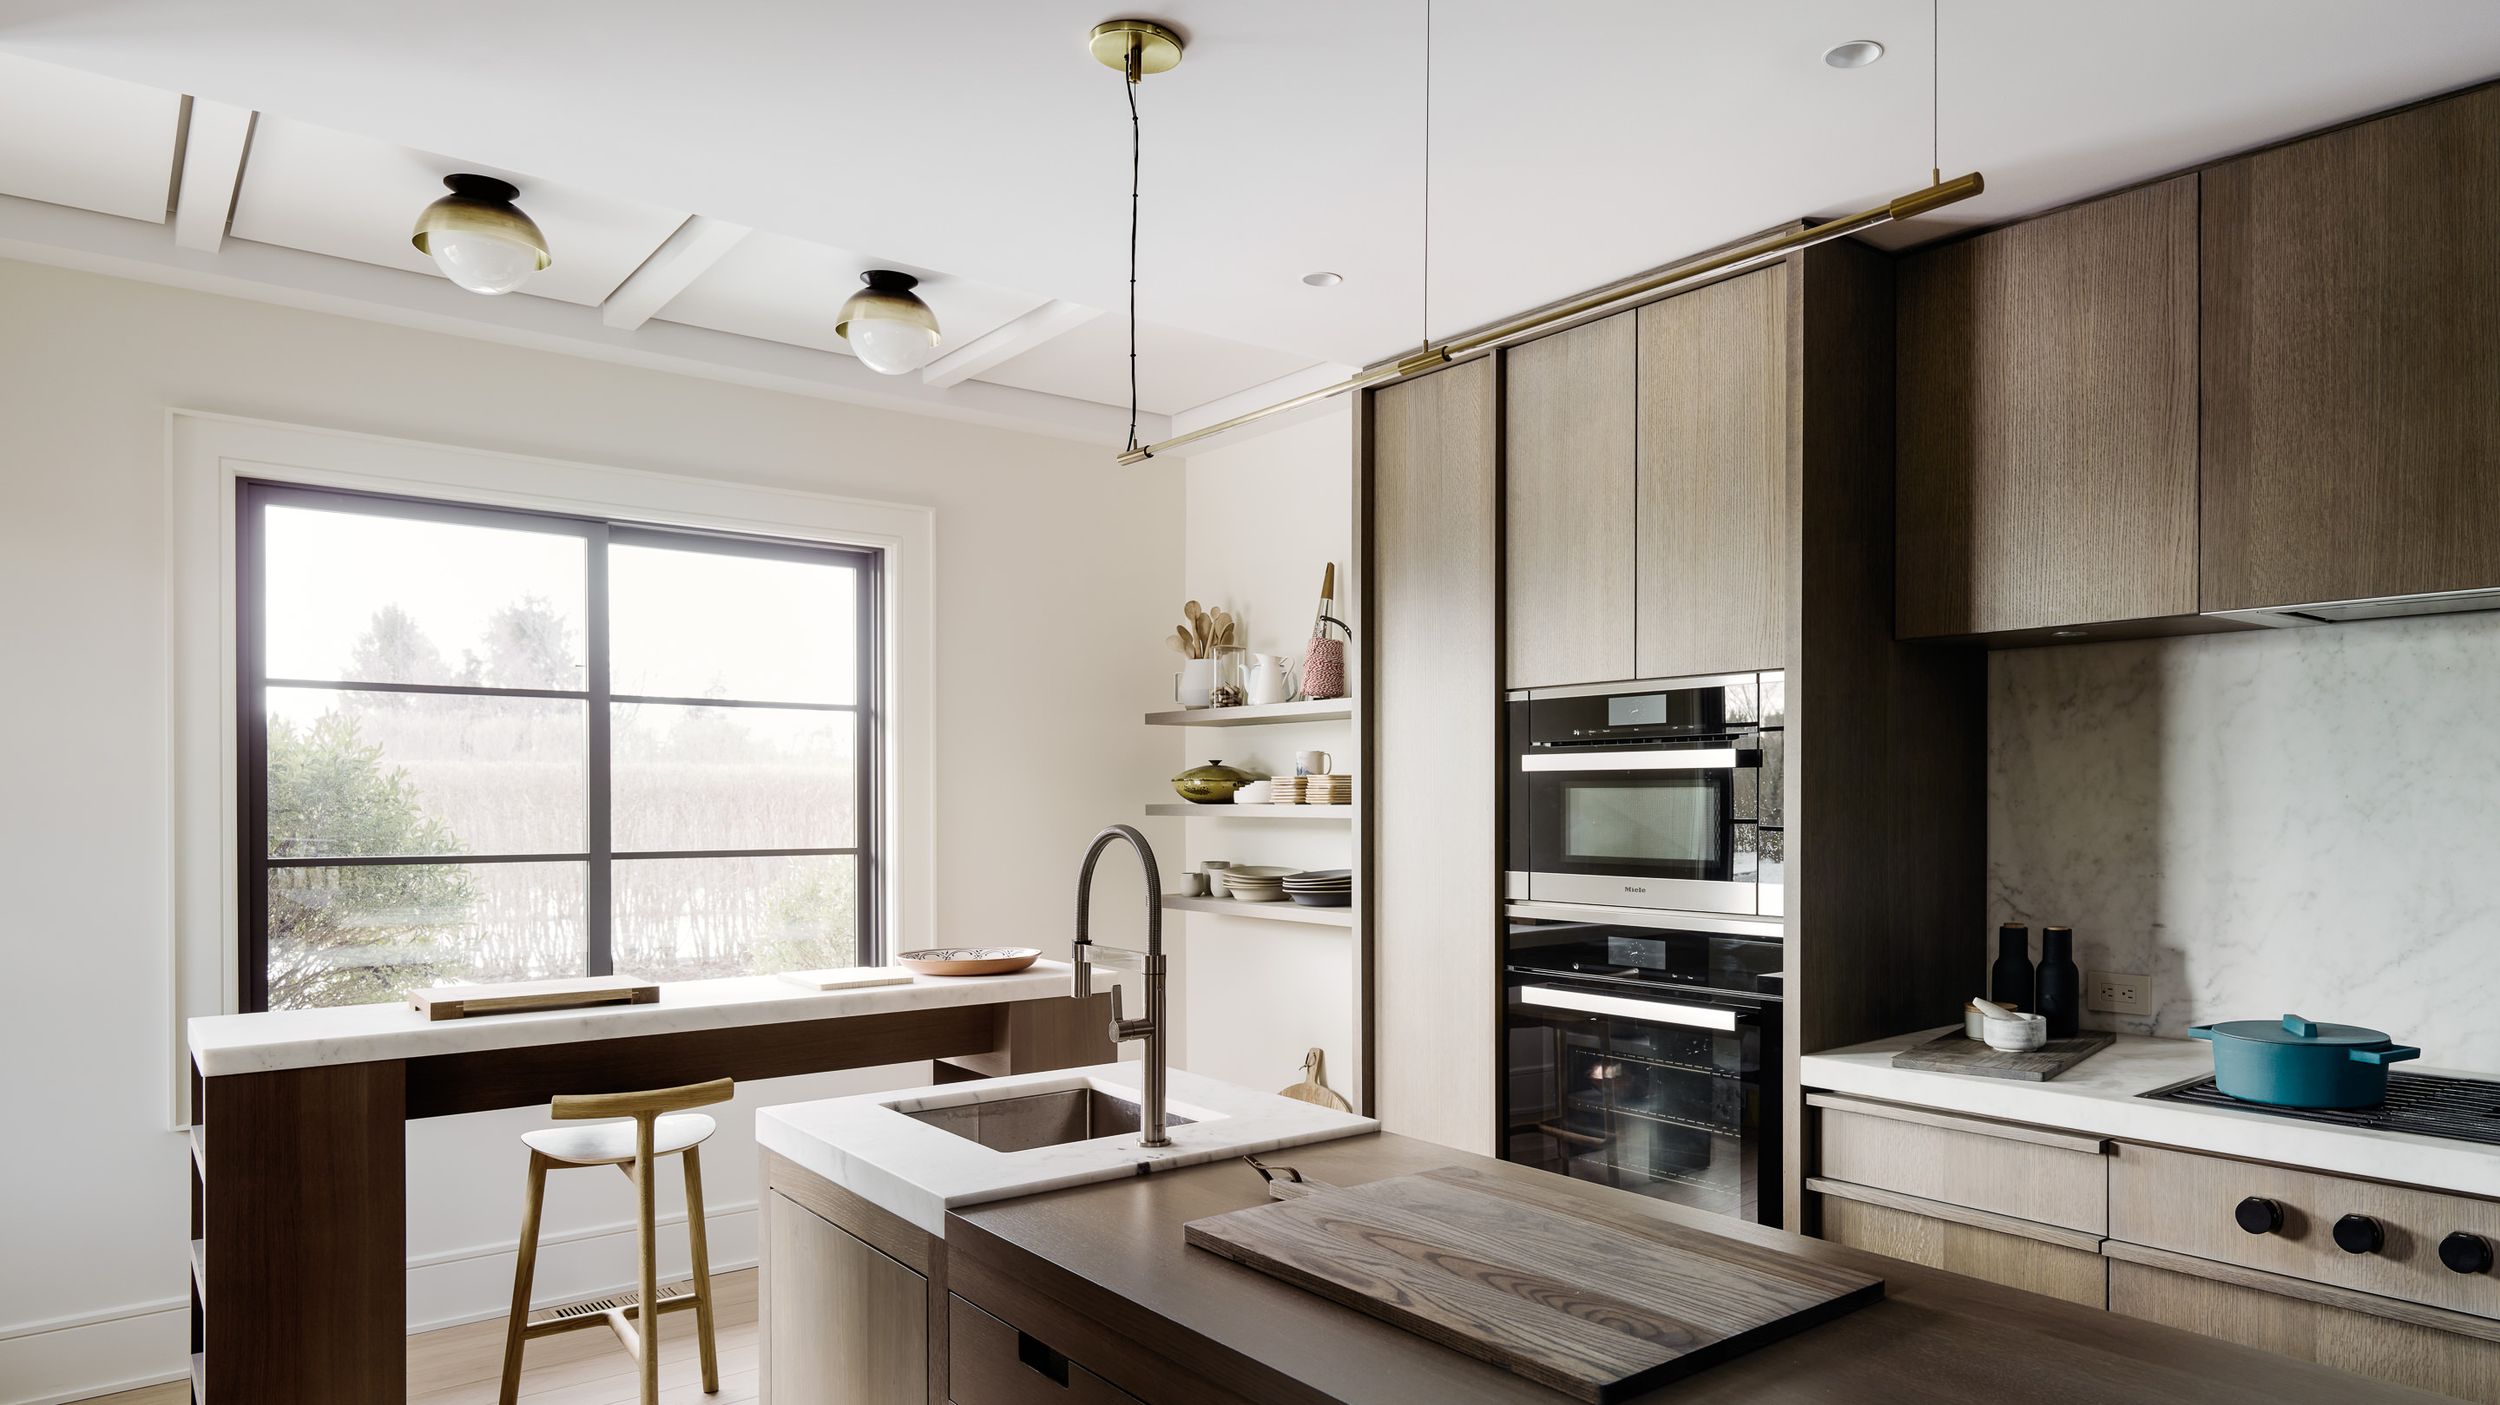 35 Kitchen Cabinet Colors That Will Stand the Test of Time